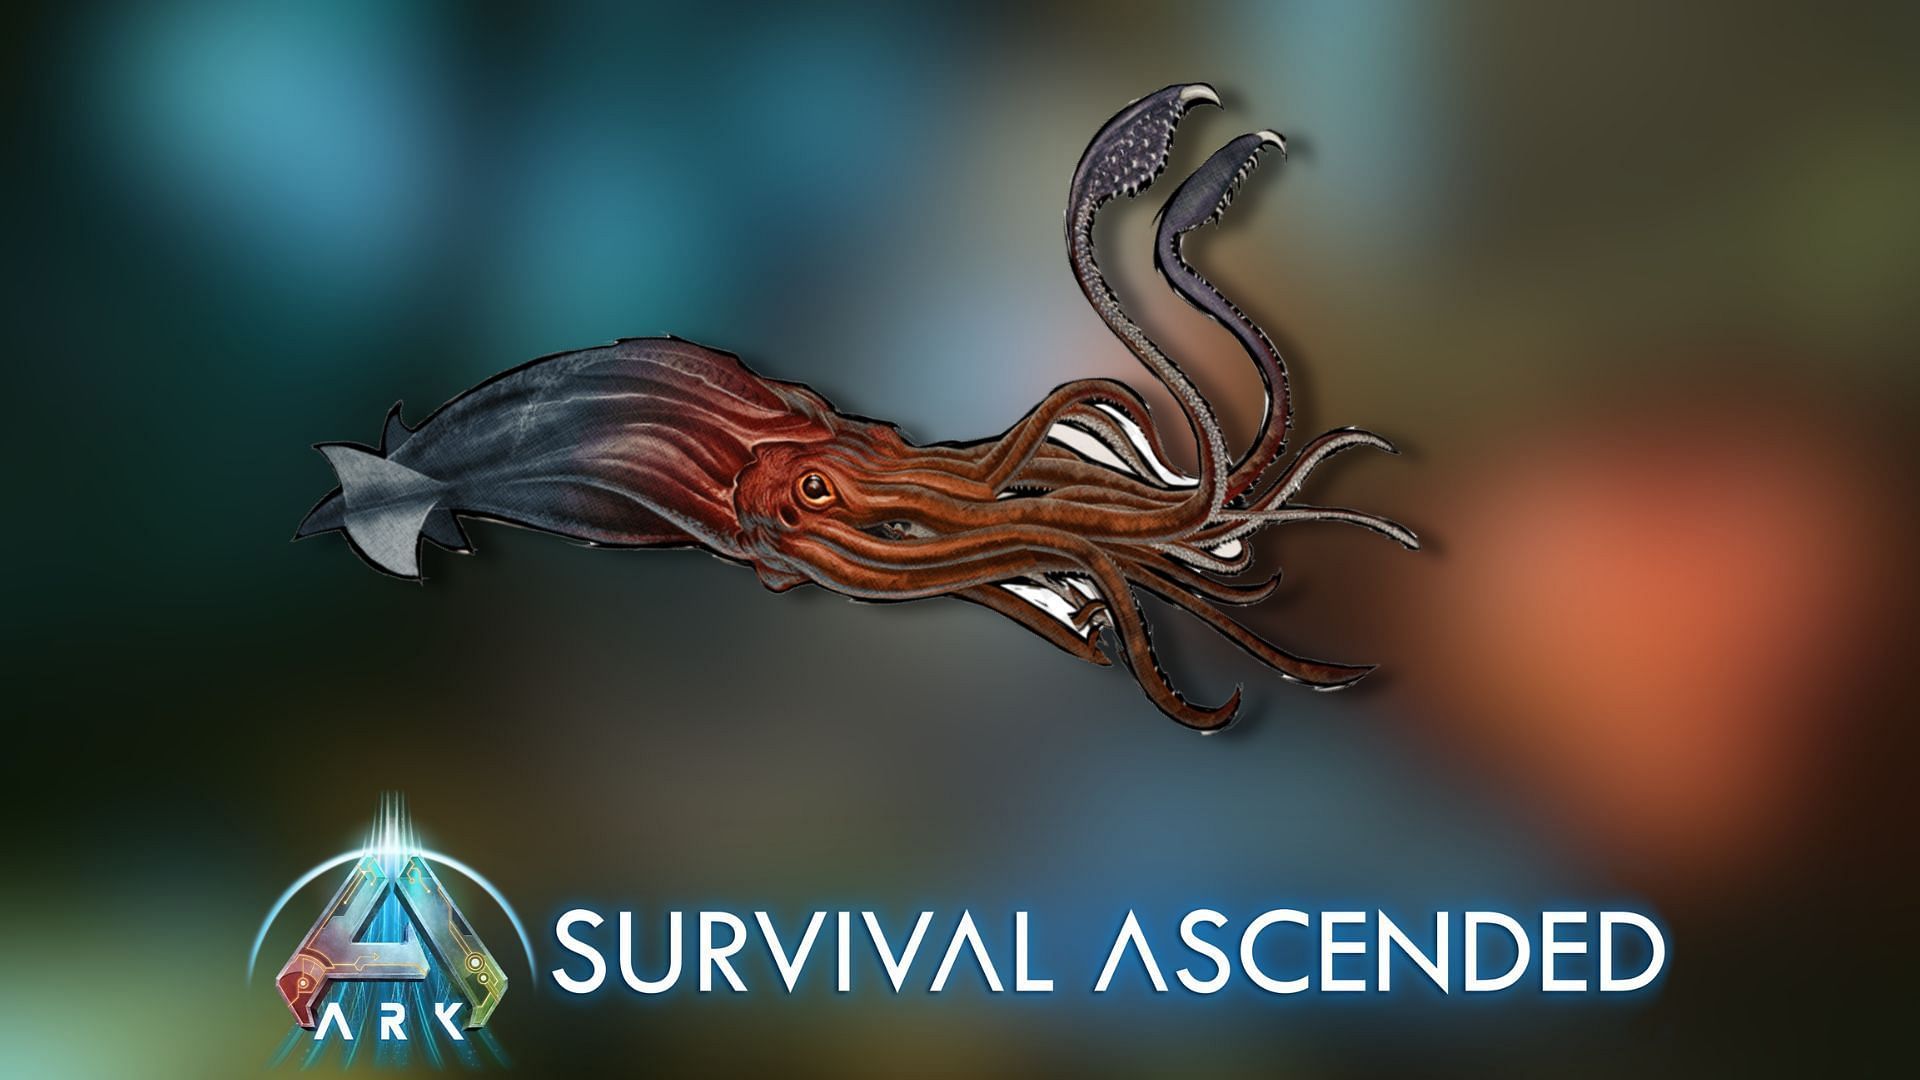 Ark Survival Ascended Tusoteuthis taming guide